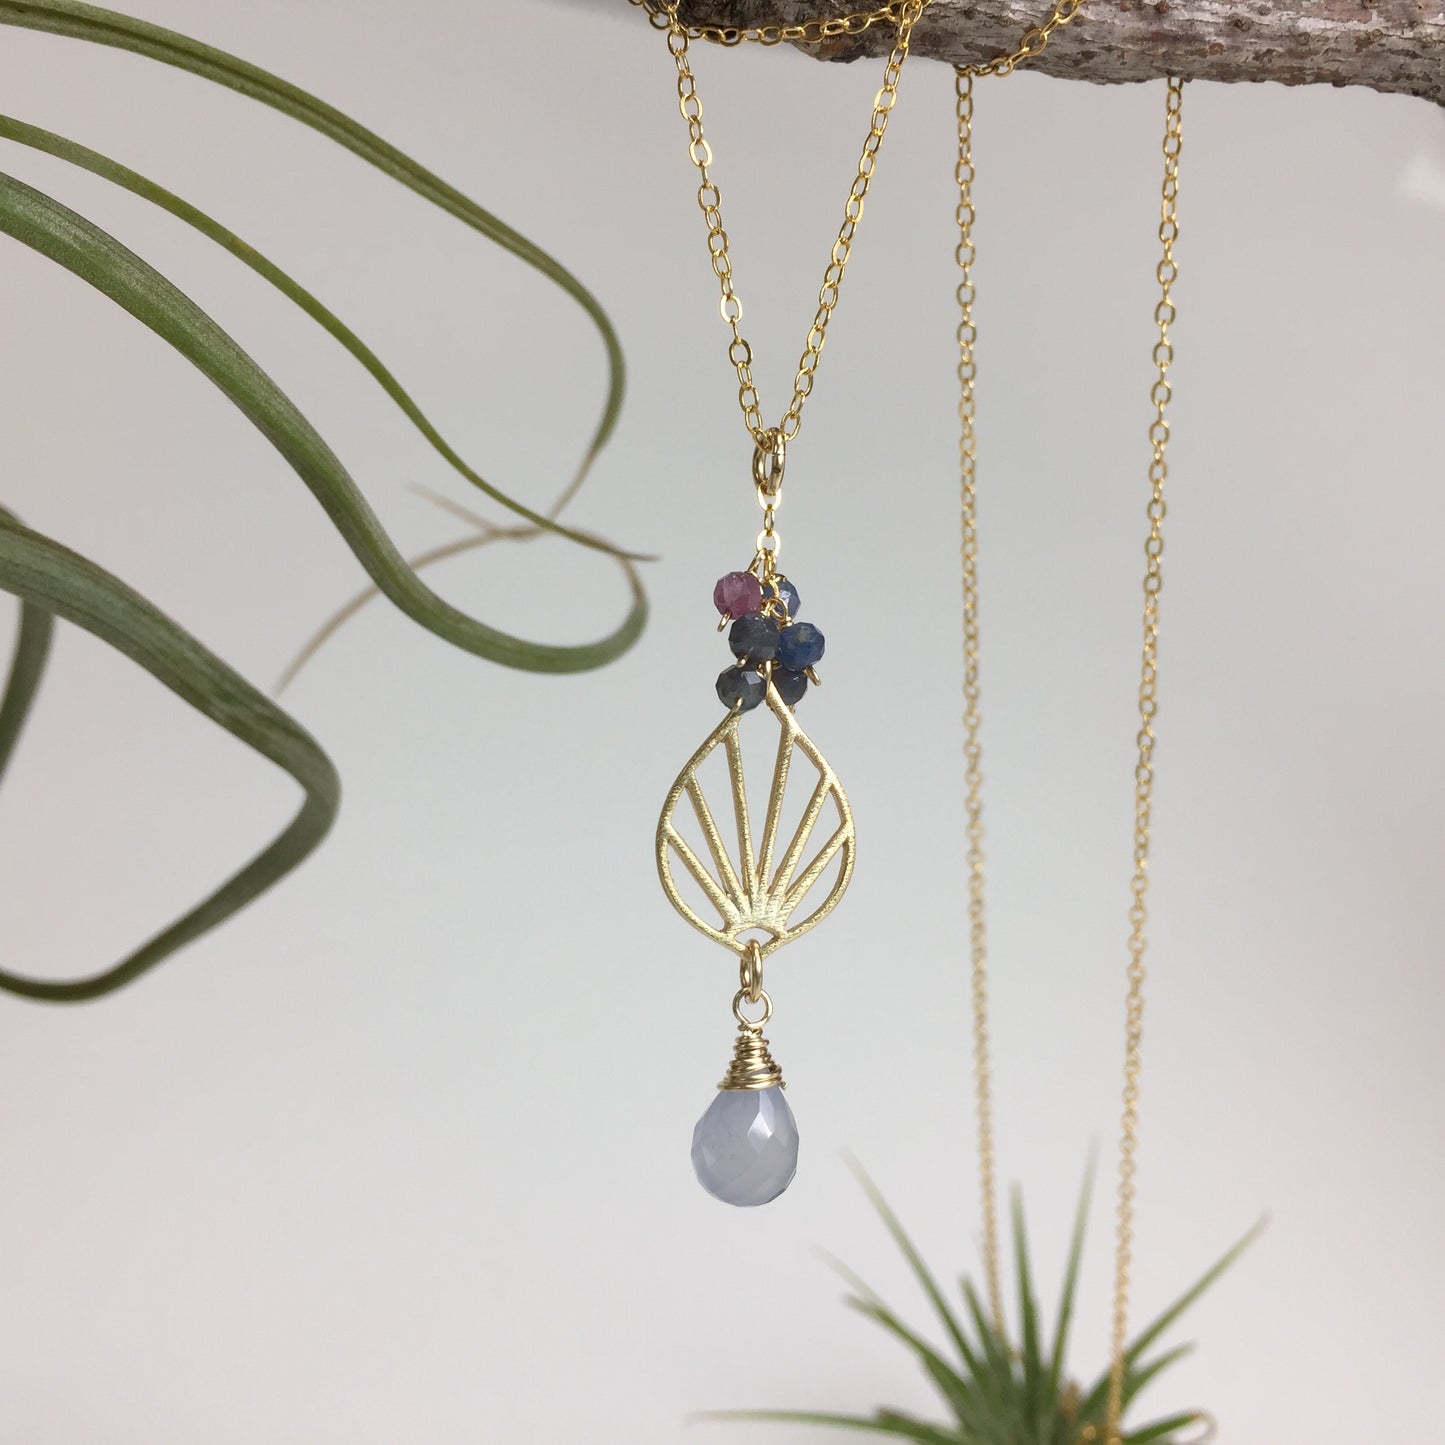 Small Deco Palm Drop (3 Colors Available) - 1 pc.